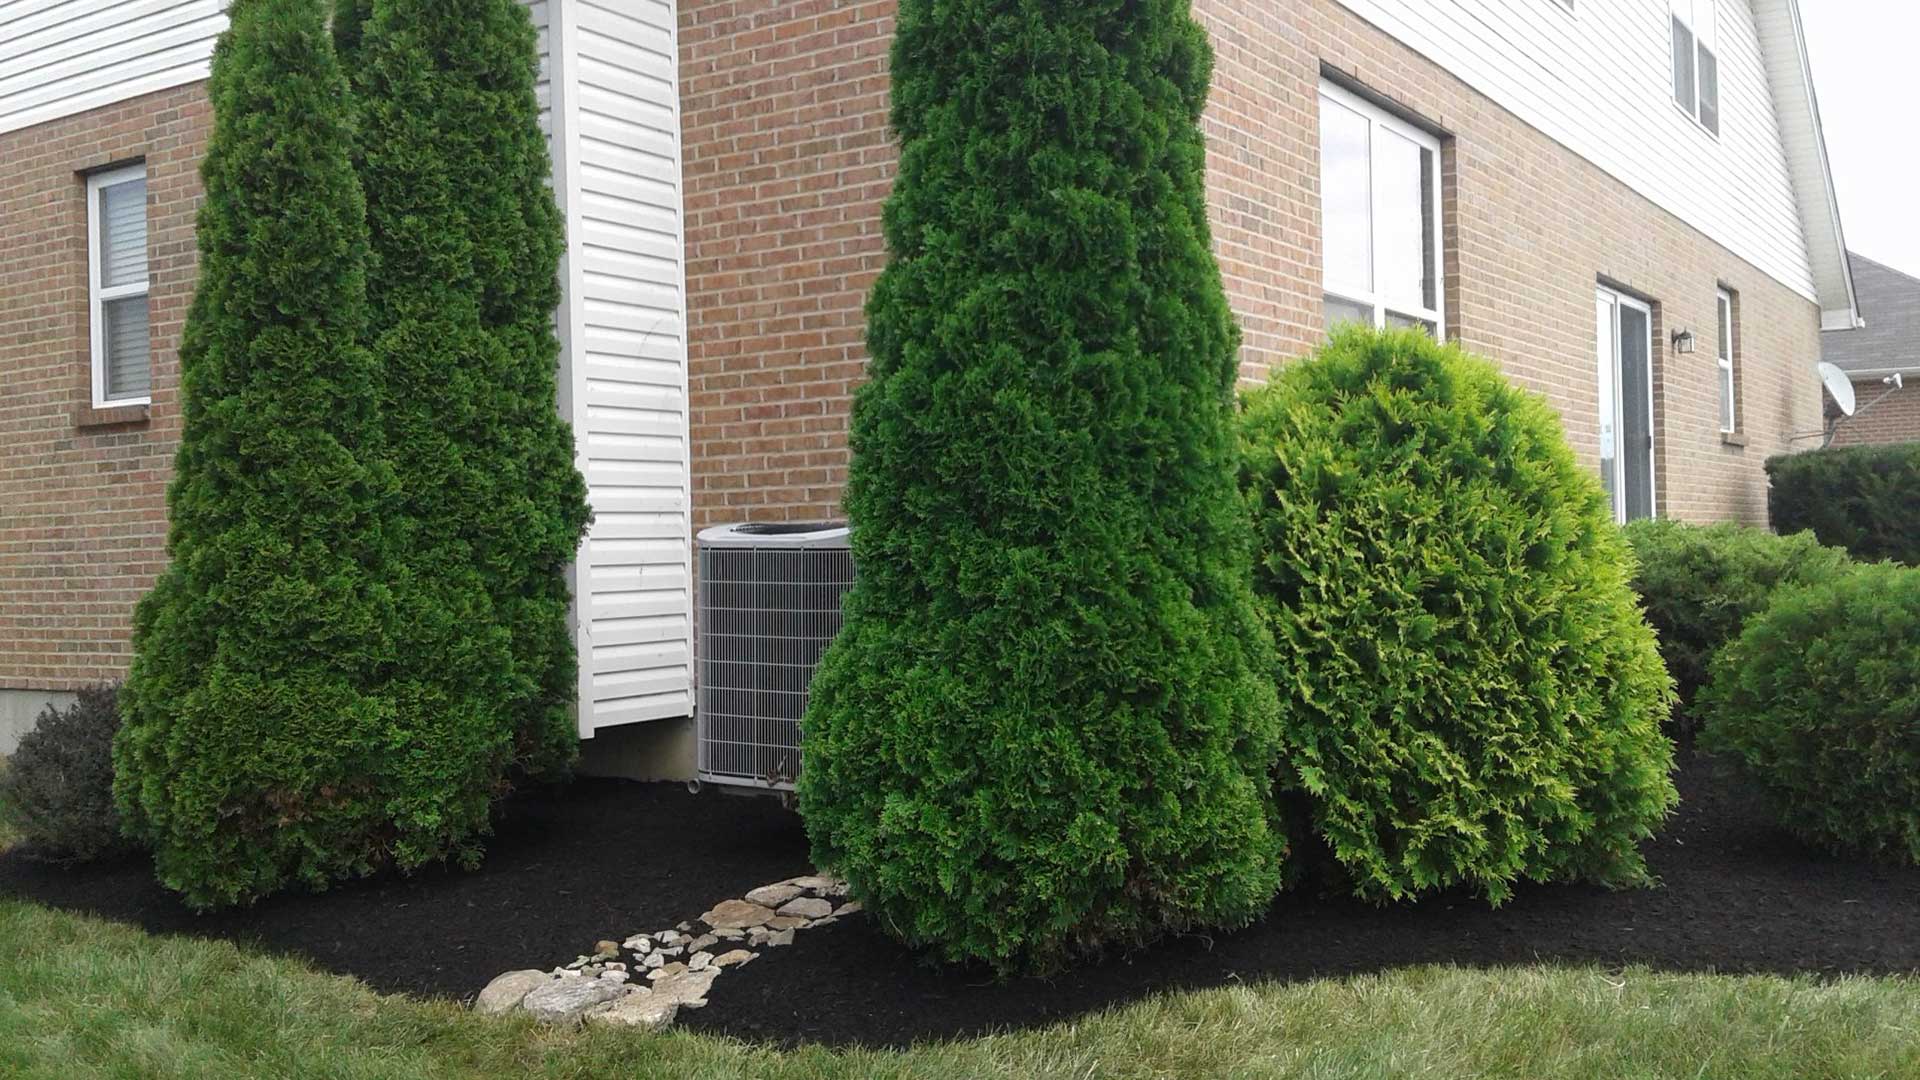 Shrubs trimmed and mulch maintained in Mason, OH.